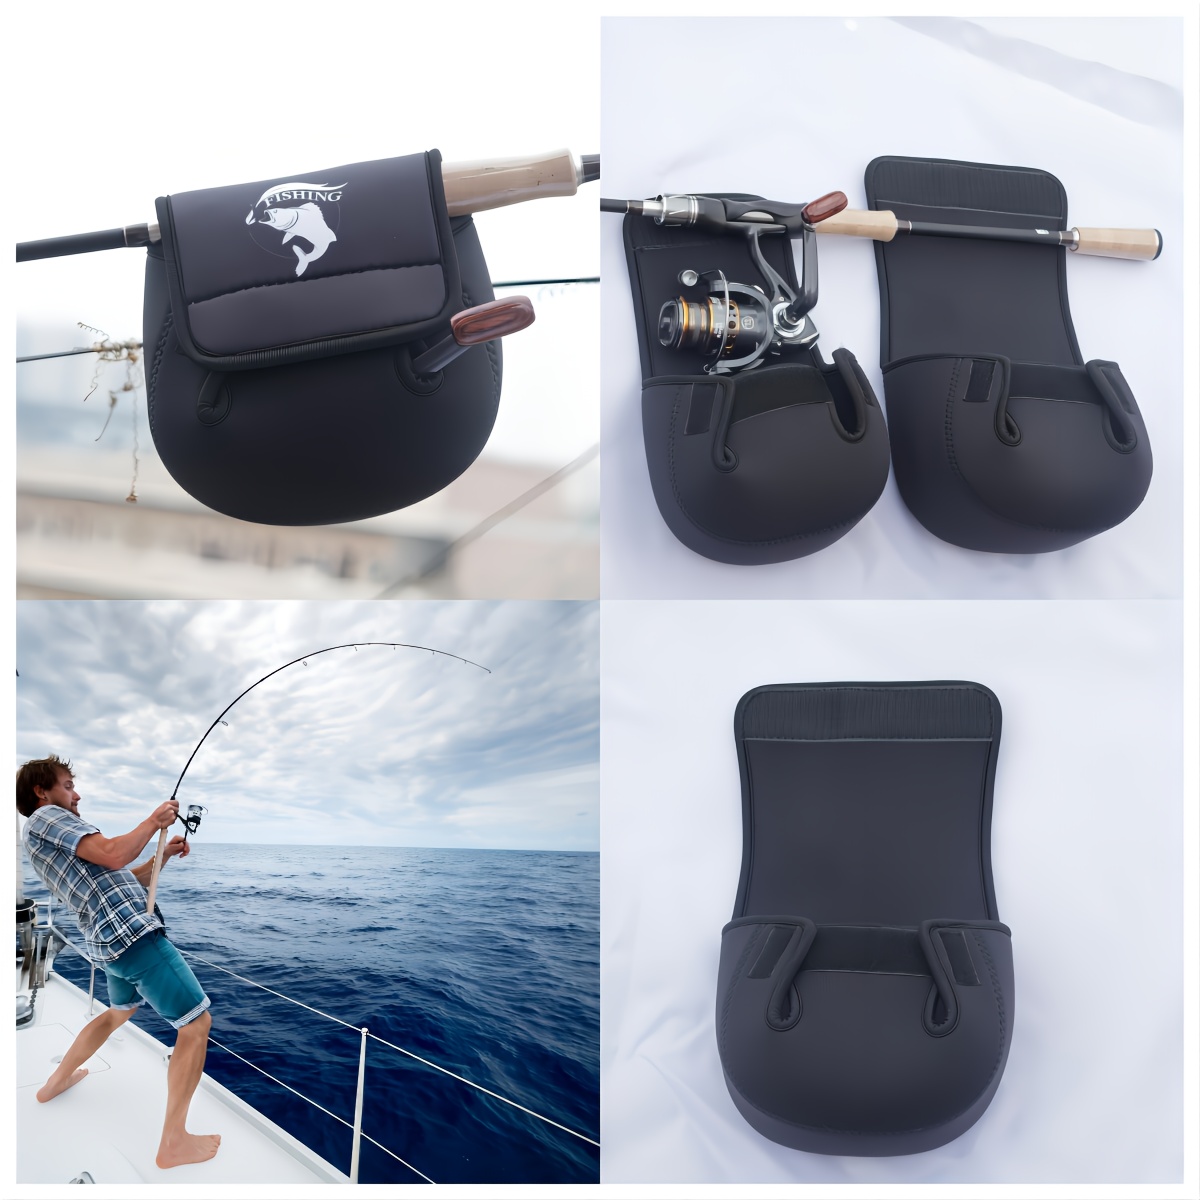 1pc Black Spinning Reel Cover For Fishing Reel 5000 Size, With